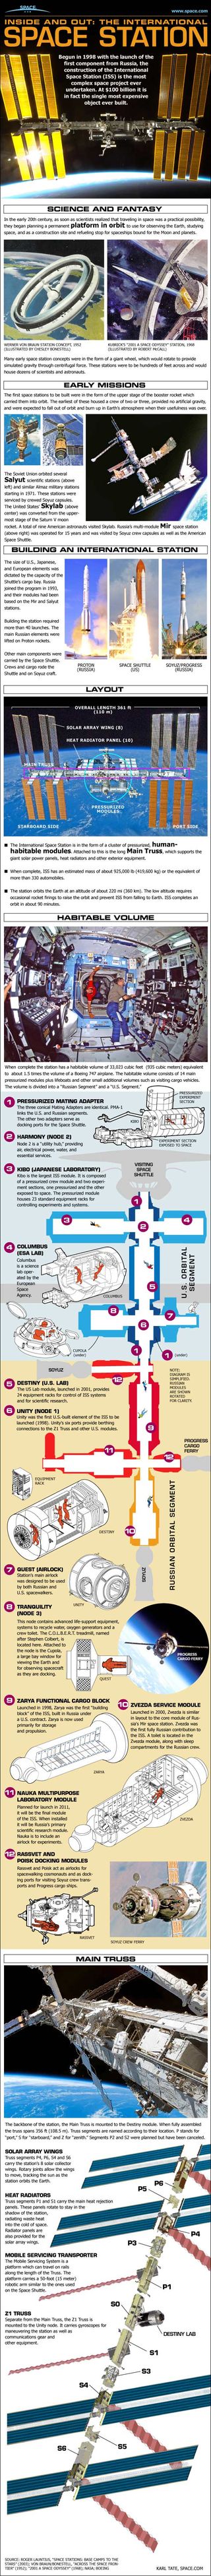 Take a detailed tour of the International Space Station from the inside out in this SPACE.com infographic. See the full image here.